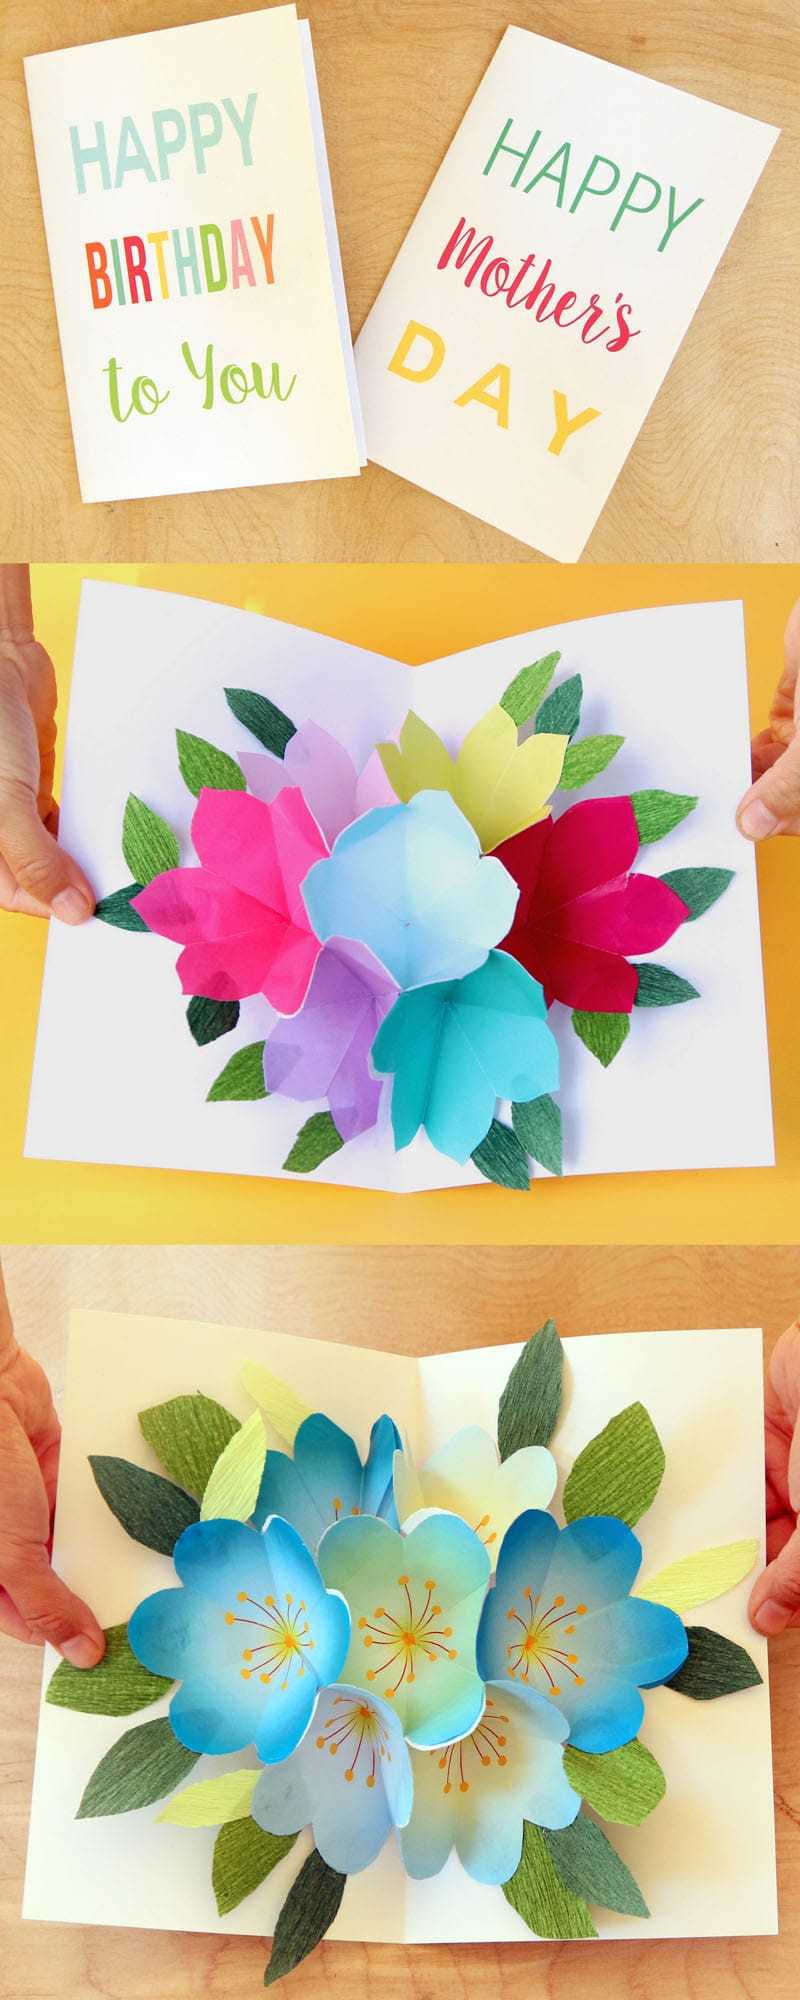 Free Printable Happy Birthday Card With Pop Up Bouquet – A In Pop Up Card Templates Free Printable